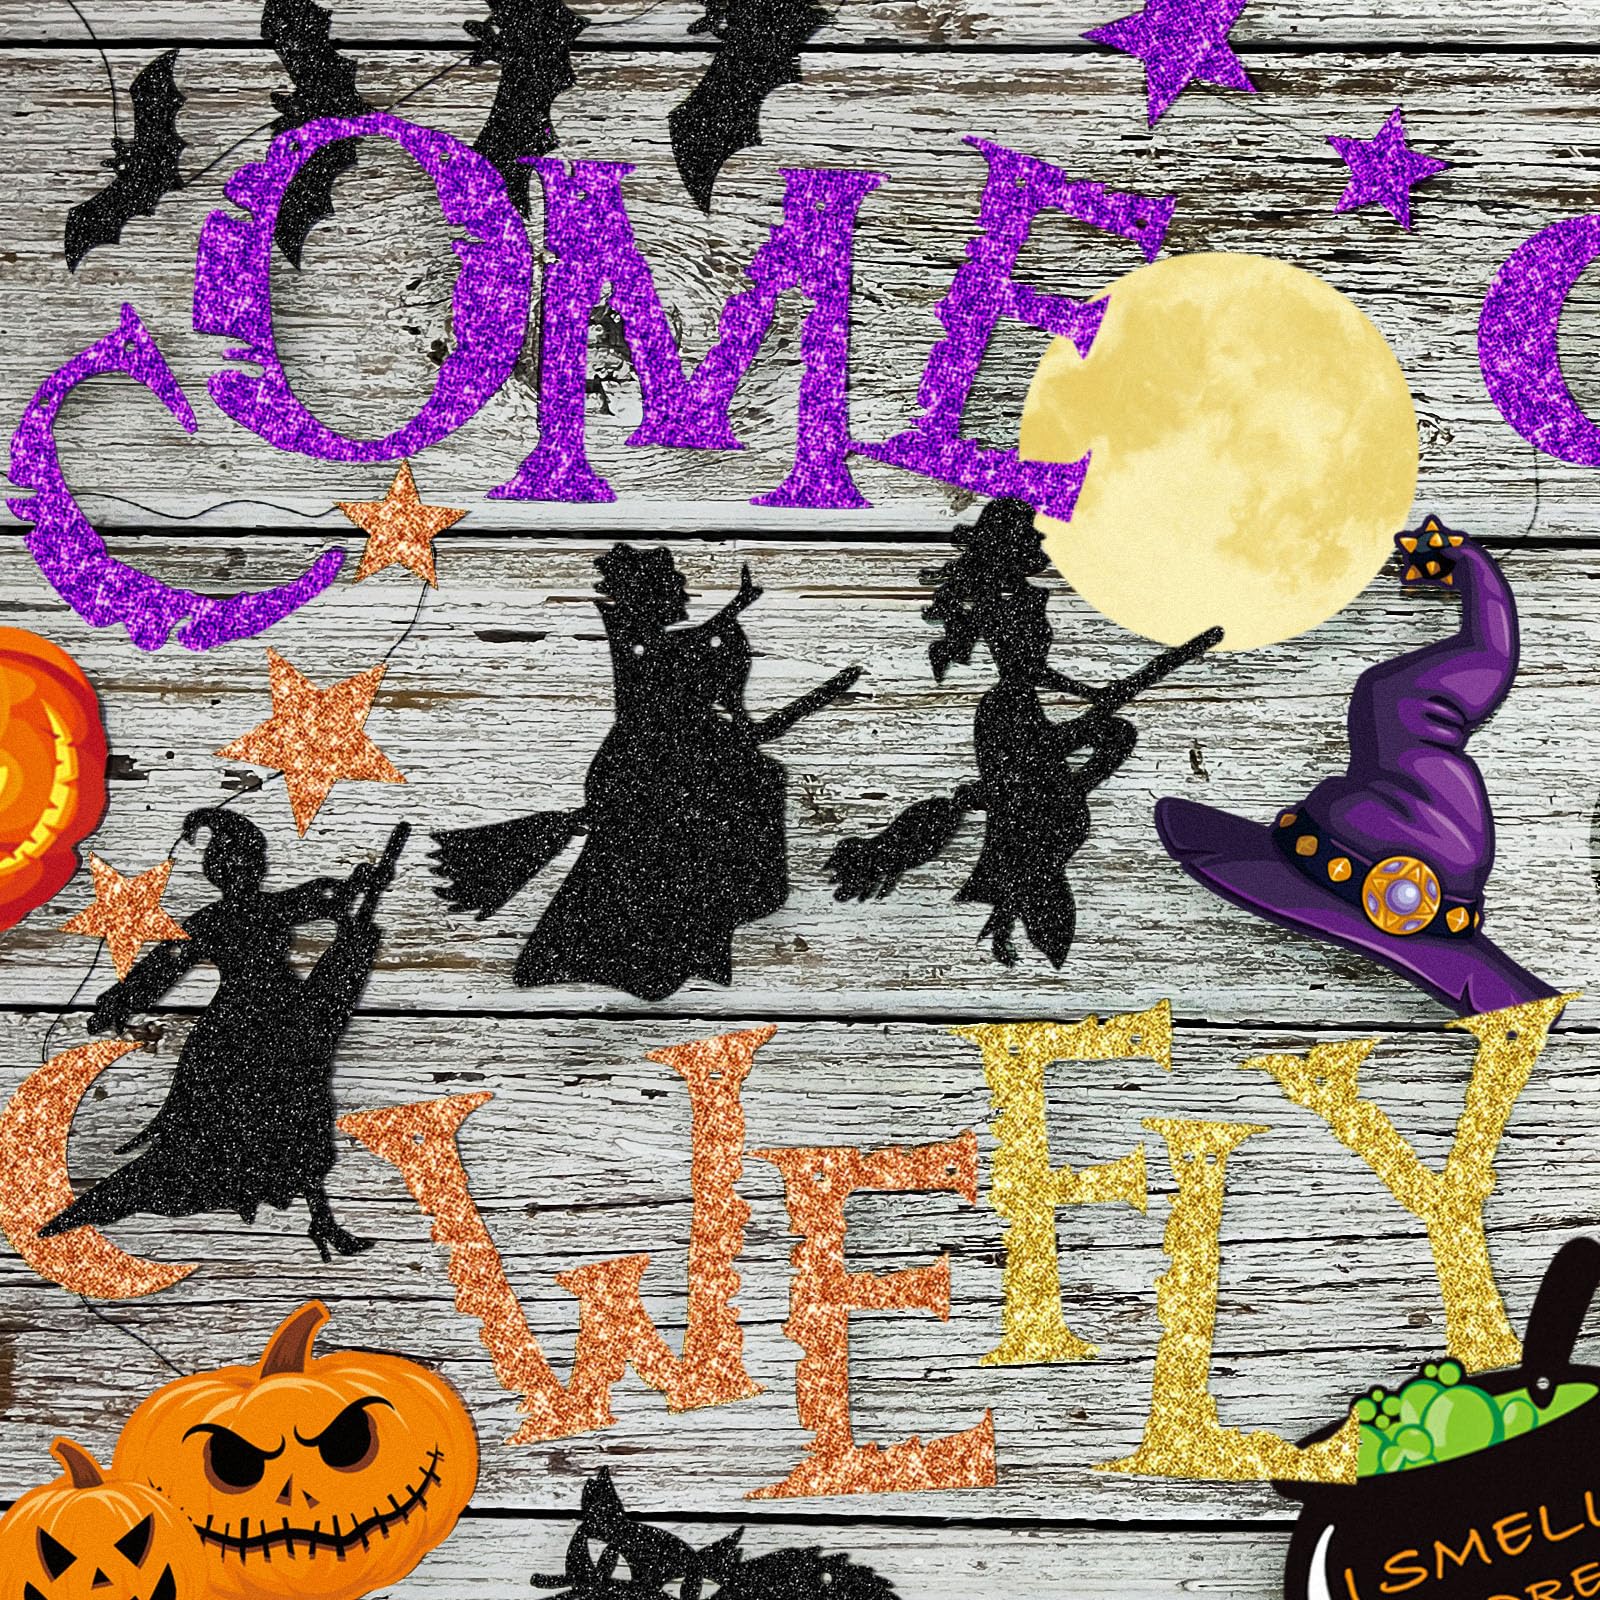 Glitter Halloween Banner Decoration - Halloween Hanging Banner Garland Decors with Ghosts, Witches, Bats, Spiders, Pumpkins - Indoor/Outdoor Party Supplies (Glitter Colorful Witch Theme)